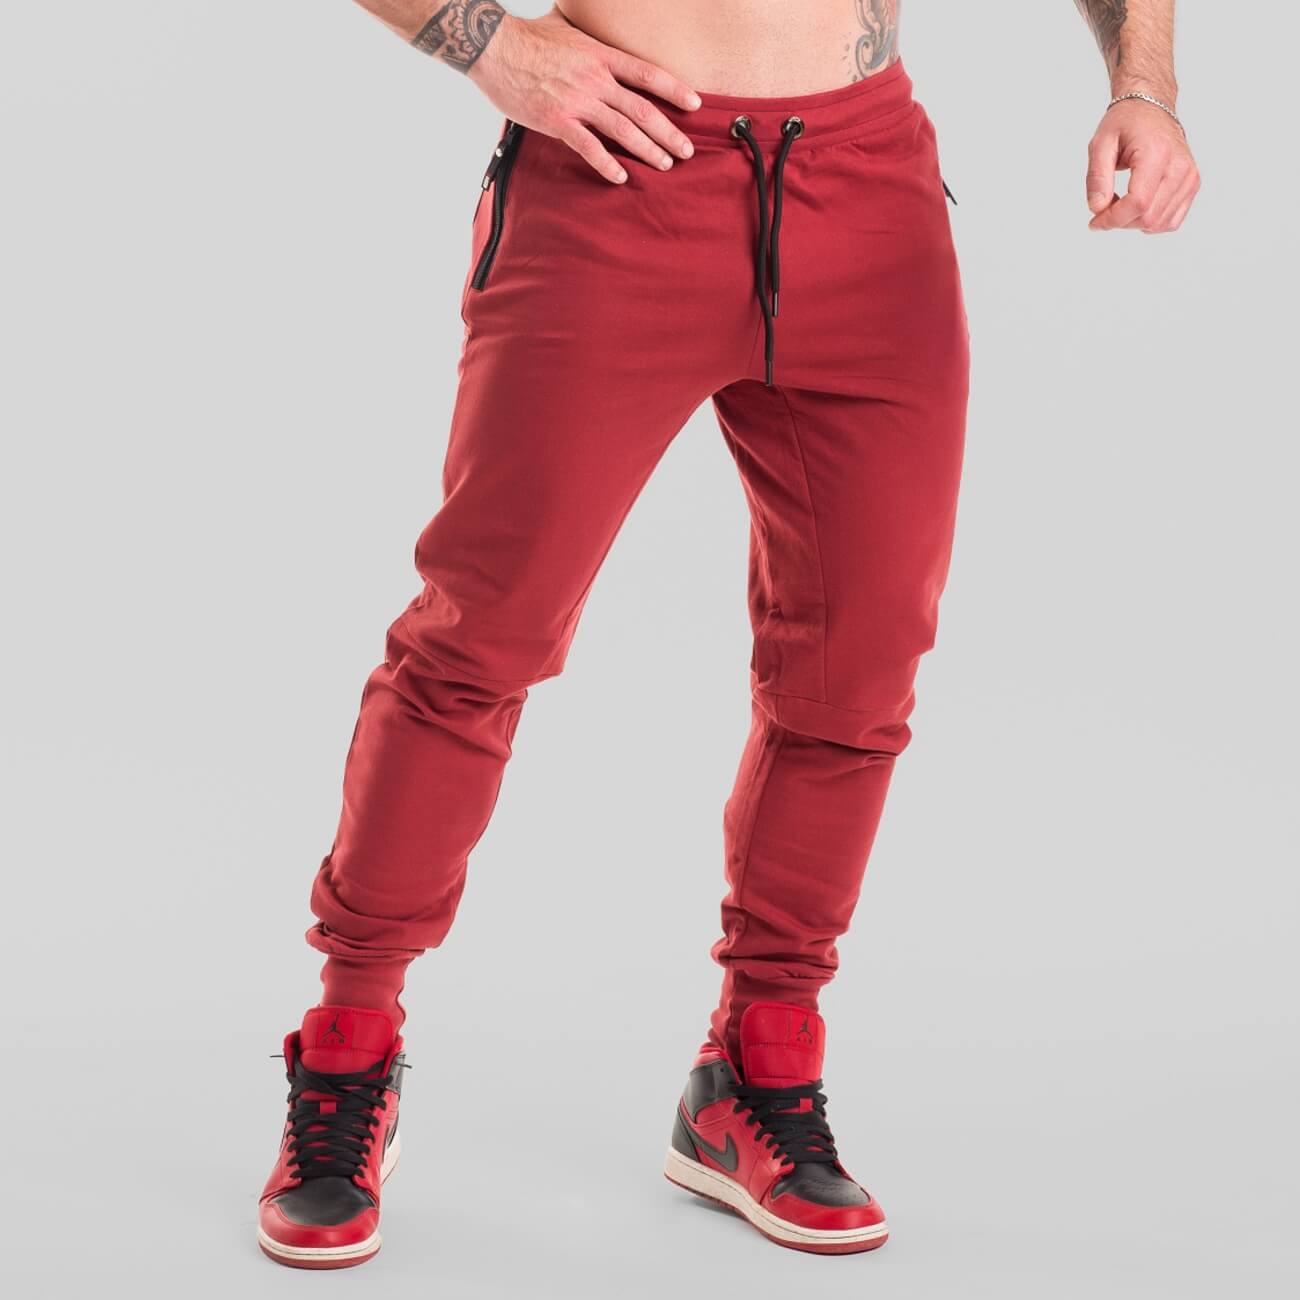 AESTHETIC-JOGGER-PANTS-RED